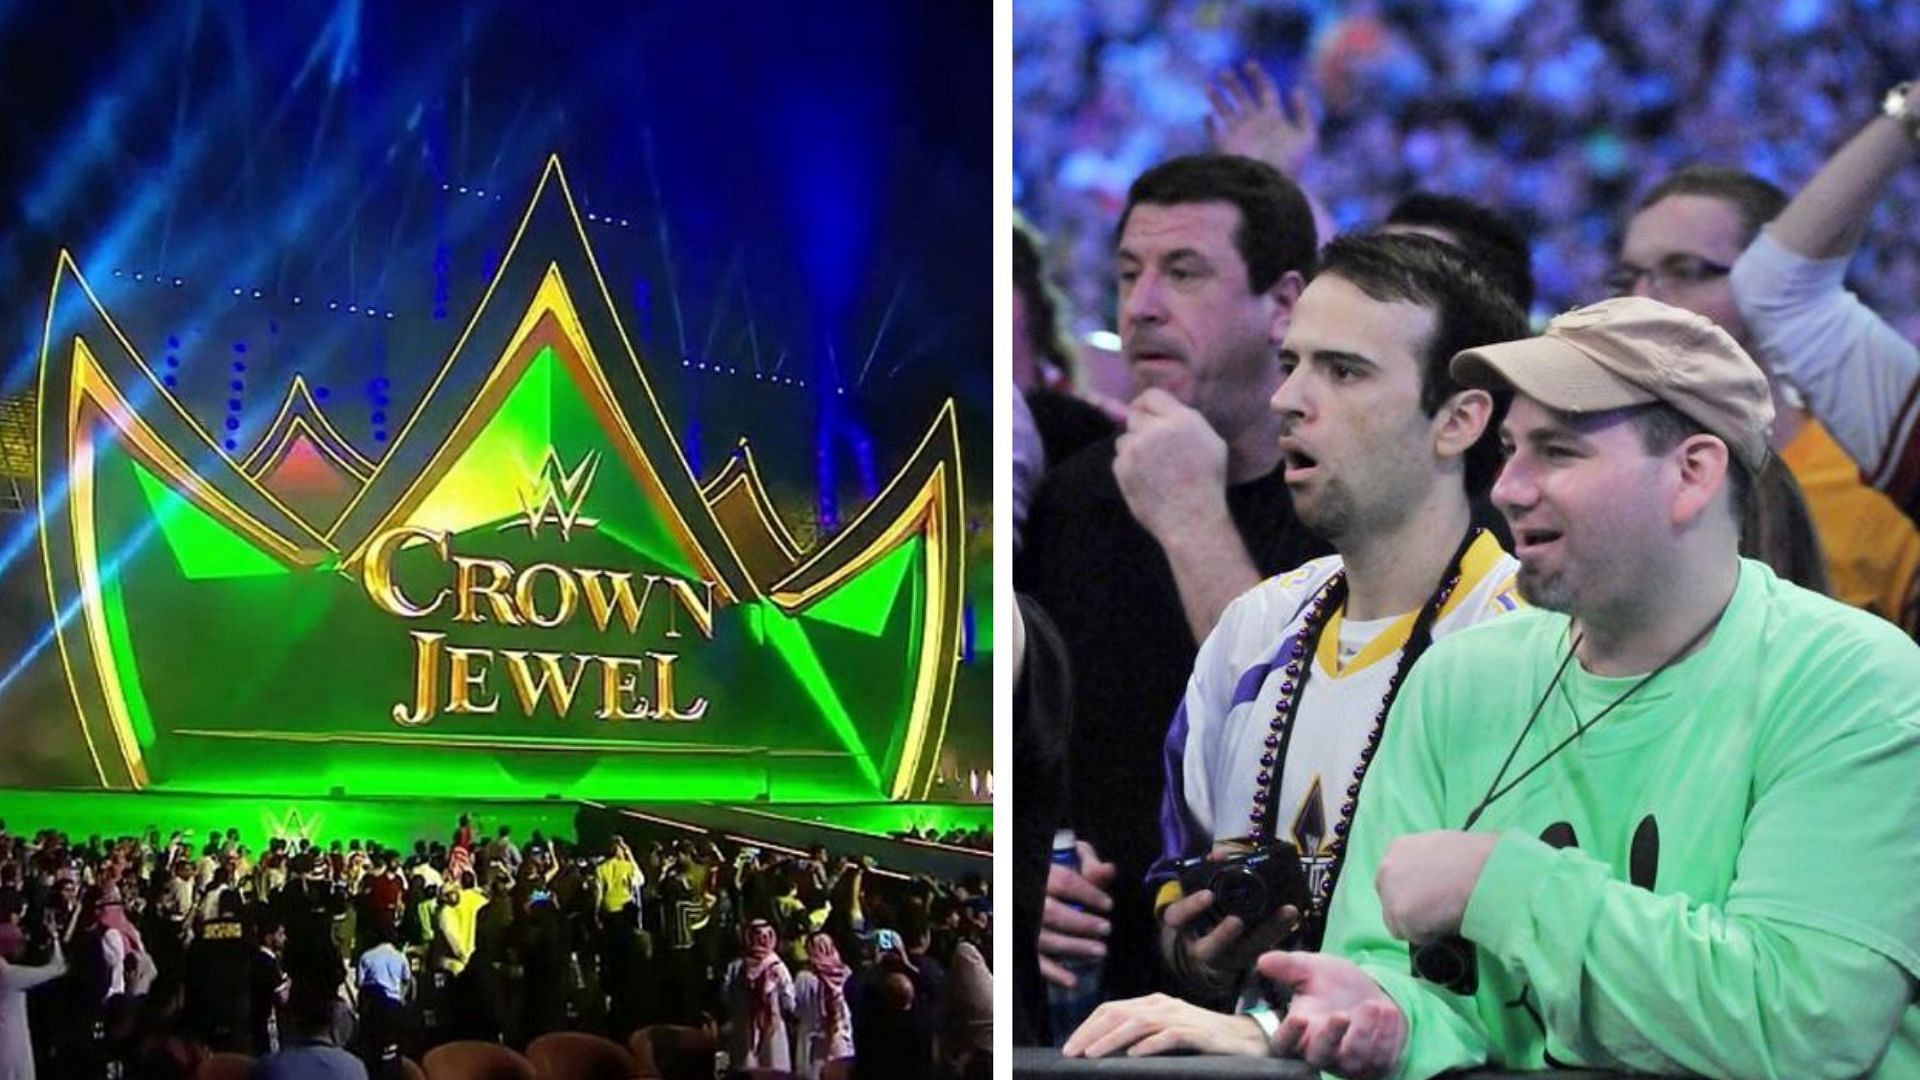 WWE Crown Jewel is scheduled for November 4, 2023